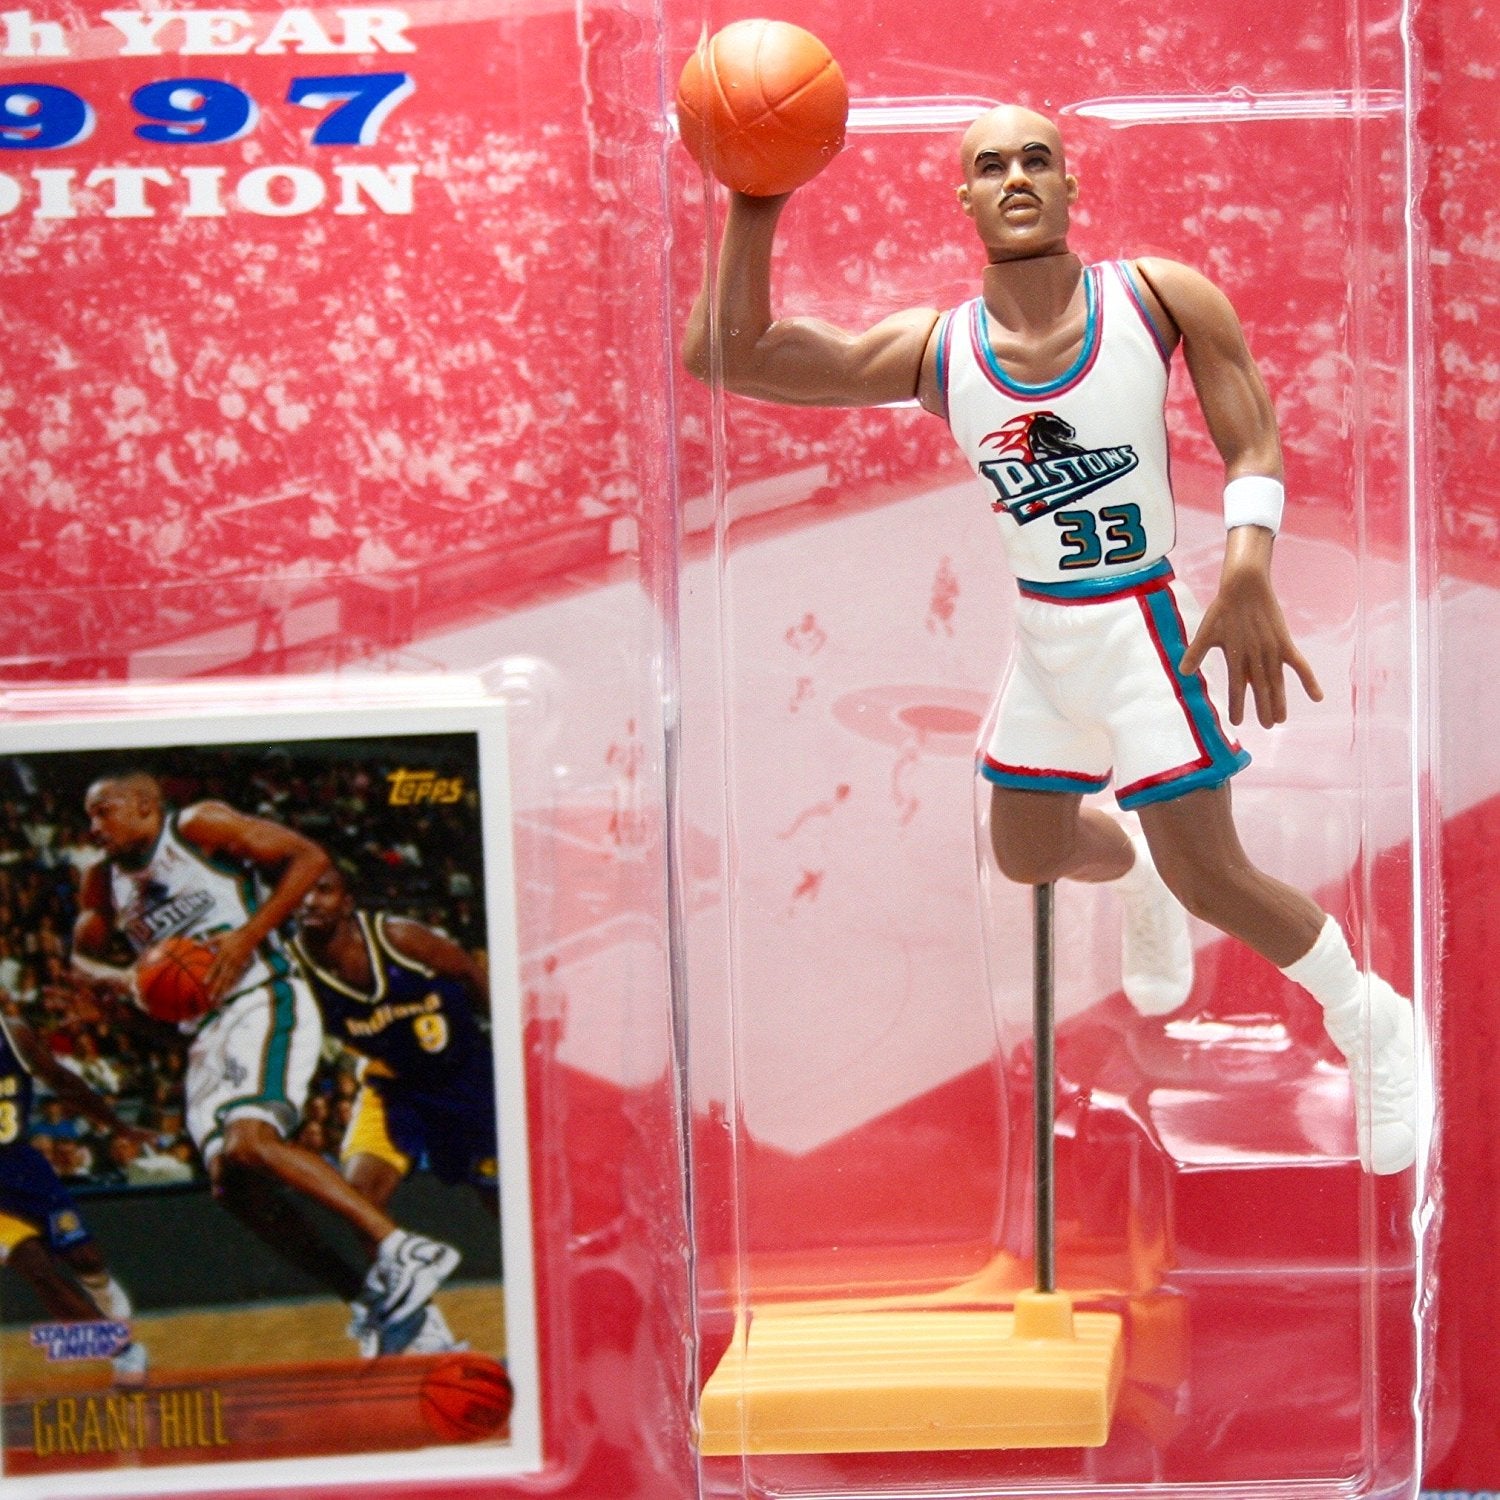 GRANT HILL / DETROIT PISTONS 1997 NBA Starting Lineup Figure & Exclusive TOPPS Collector Trading Card